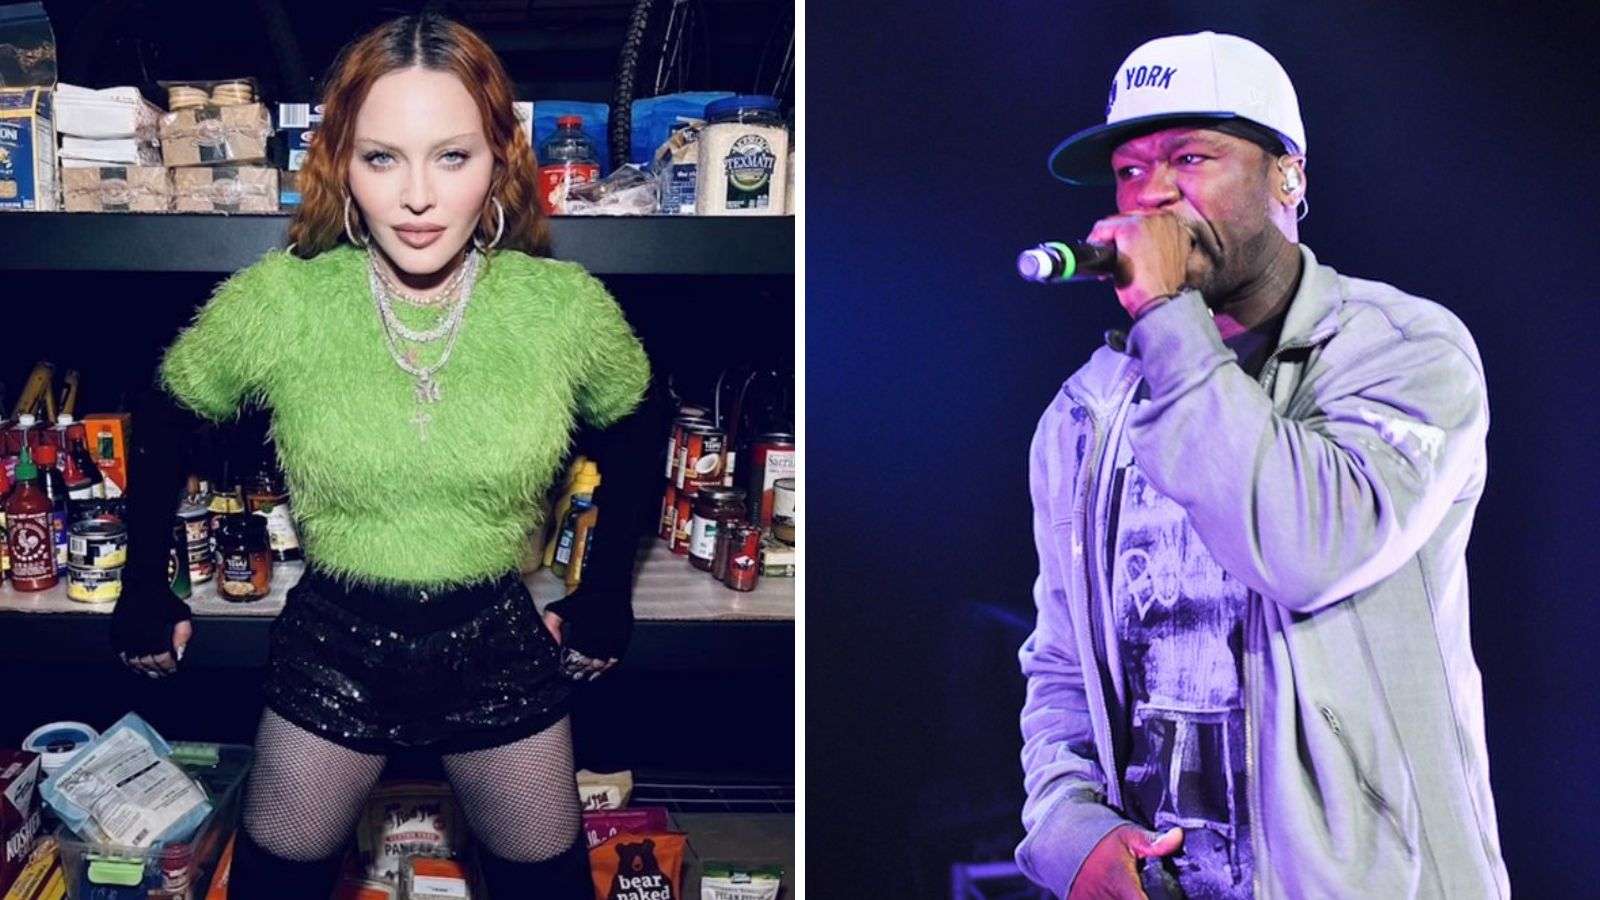 Madonna wants ‘bullying’ to stop after 50 Cent branded her a "grandma"